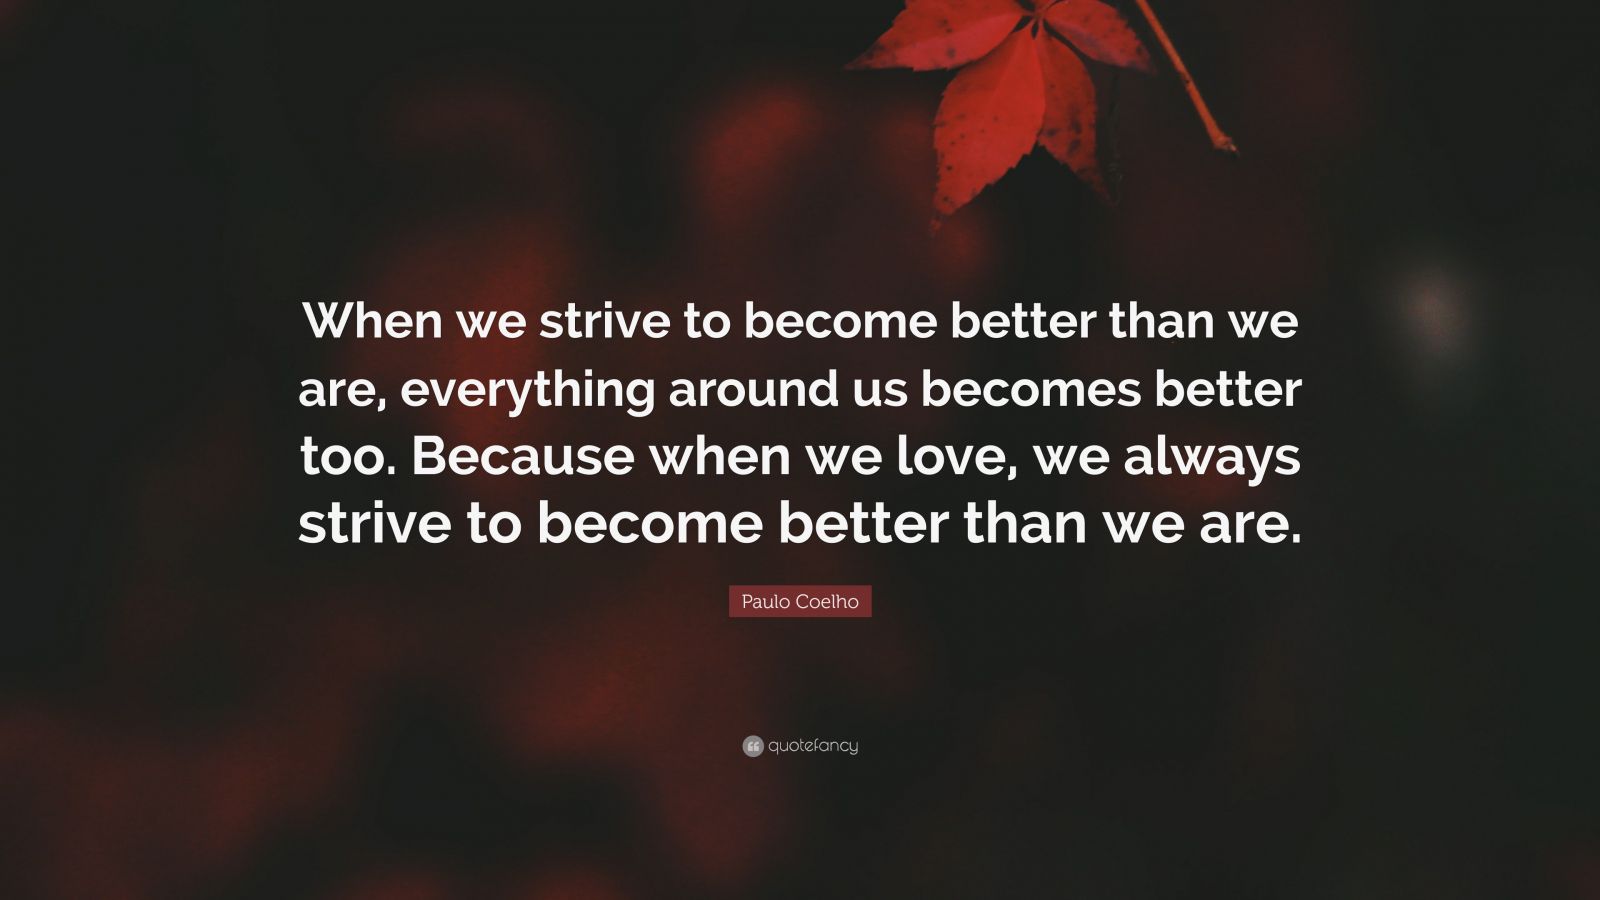 Paulo Coelho Quote: “When we strive to become better than we are ...